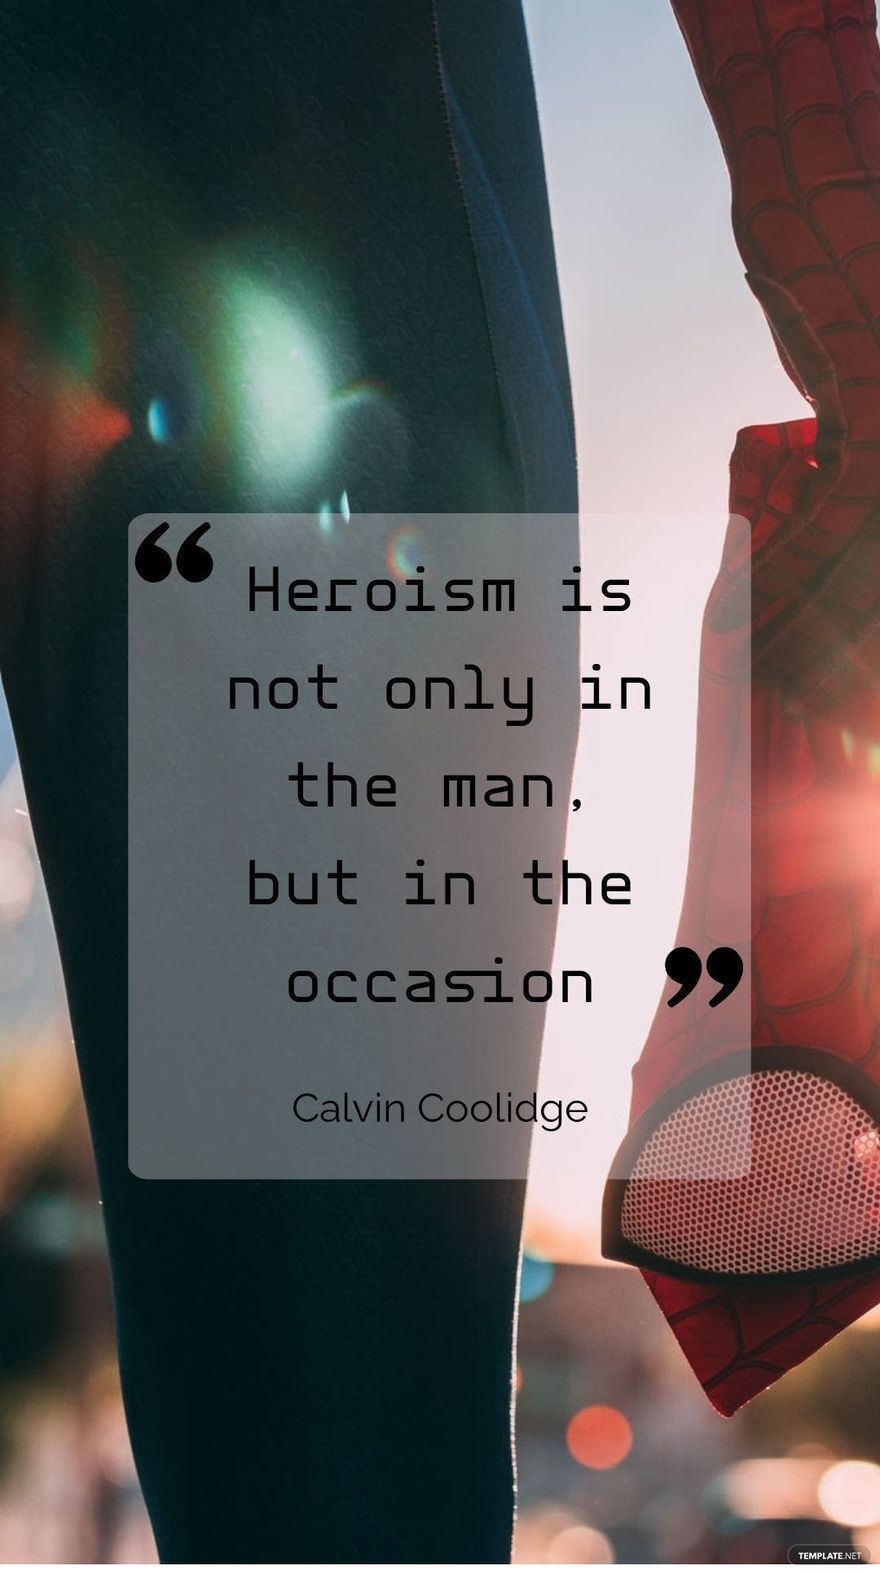 Calvin Coolidge - Heroism is not only in the man, but in the occasion in JPG